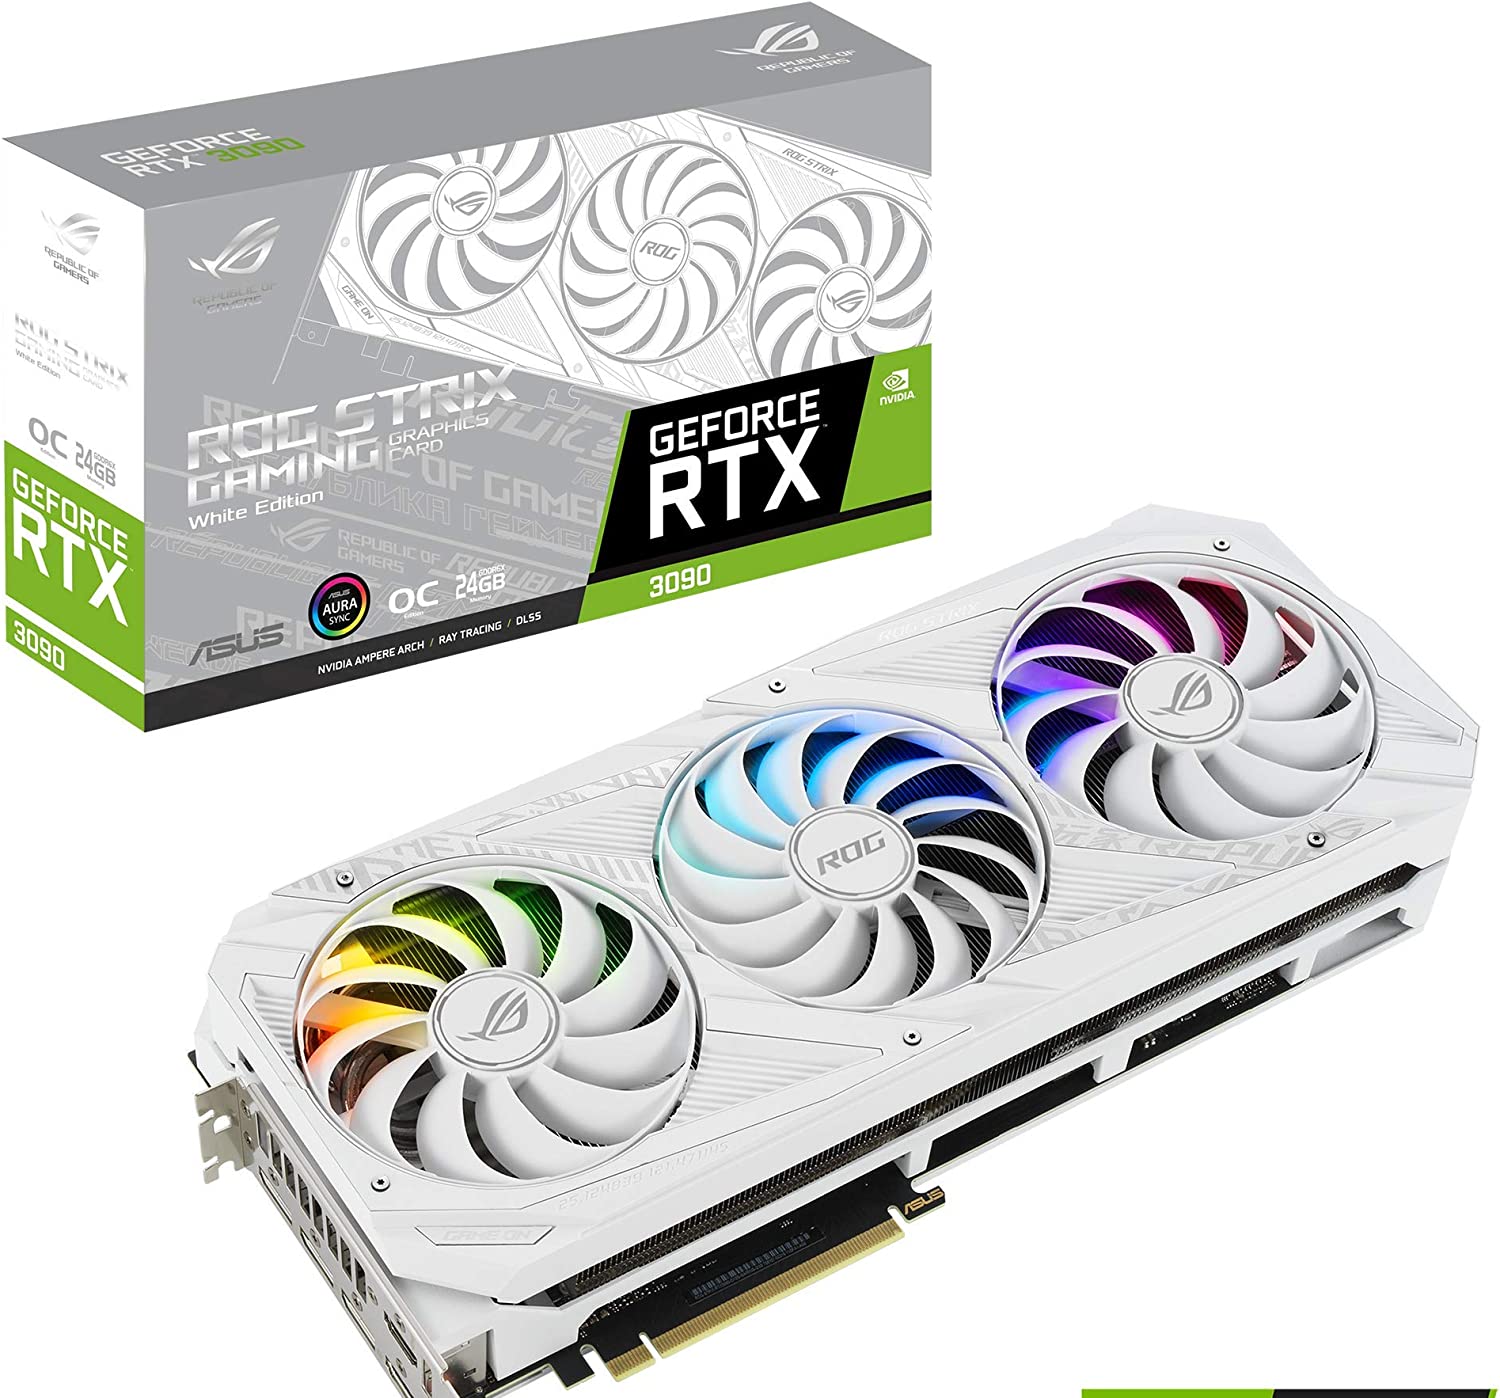 Asus rog strix nvidia geforce rtx™ 3090 white oc edition gaming graphics card